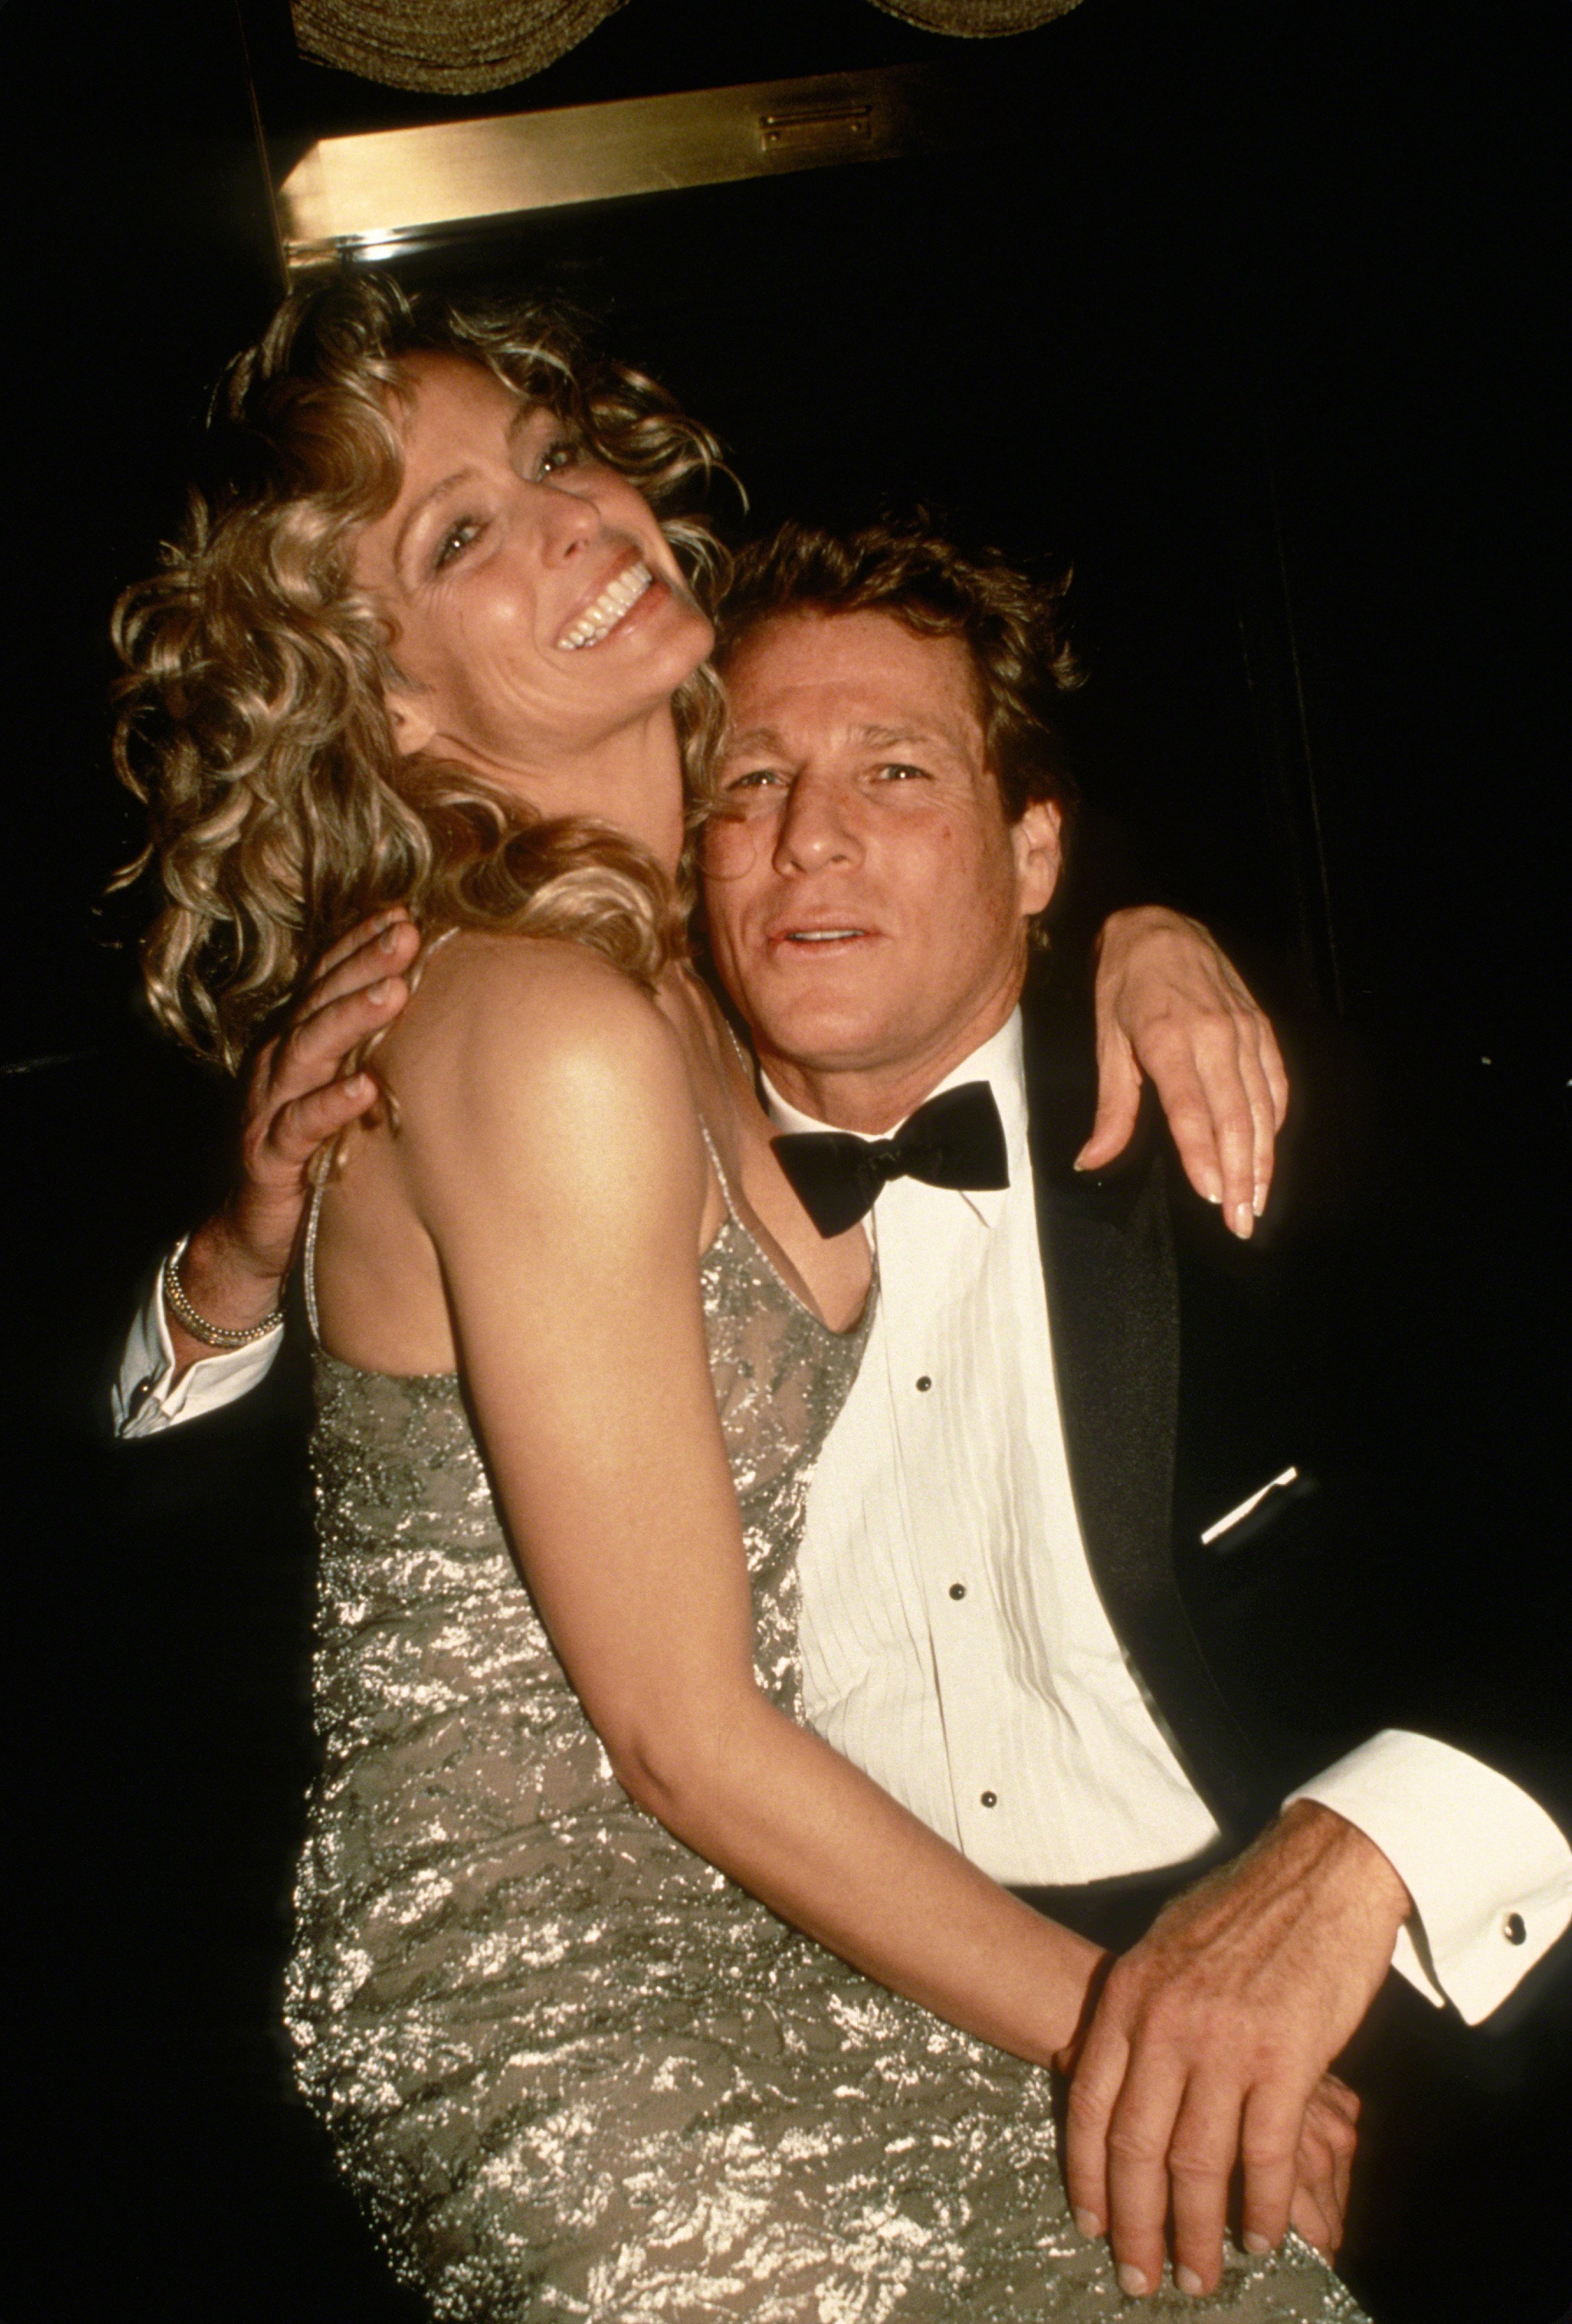 Farrah Fawcett and Ryan O'Neal attend the film premiere of "Chances Are" in 1989 in New York City. | Source: Getty Images